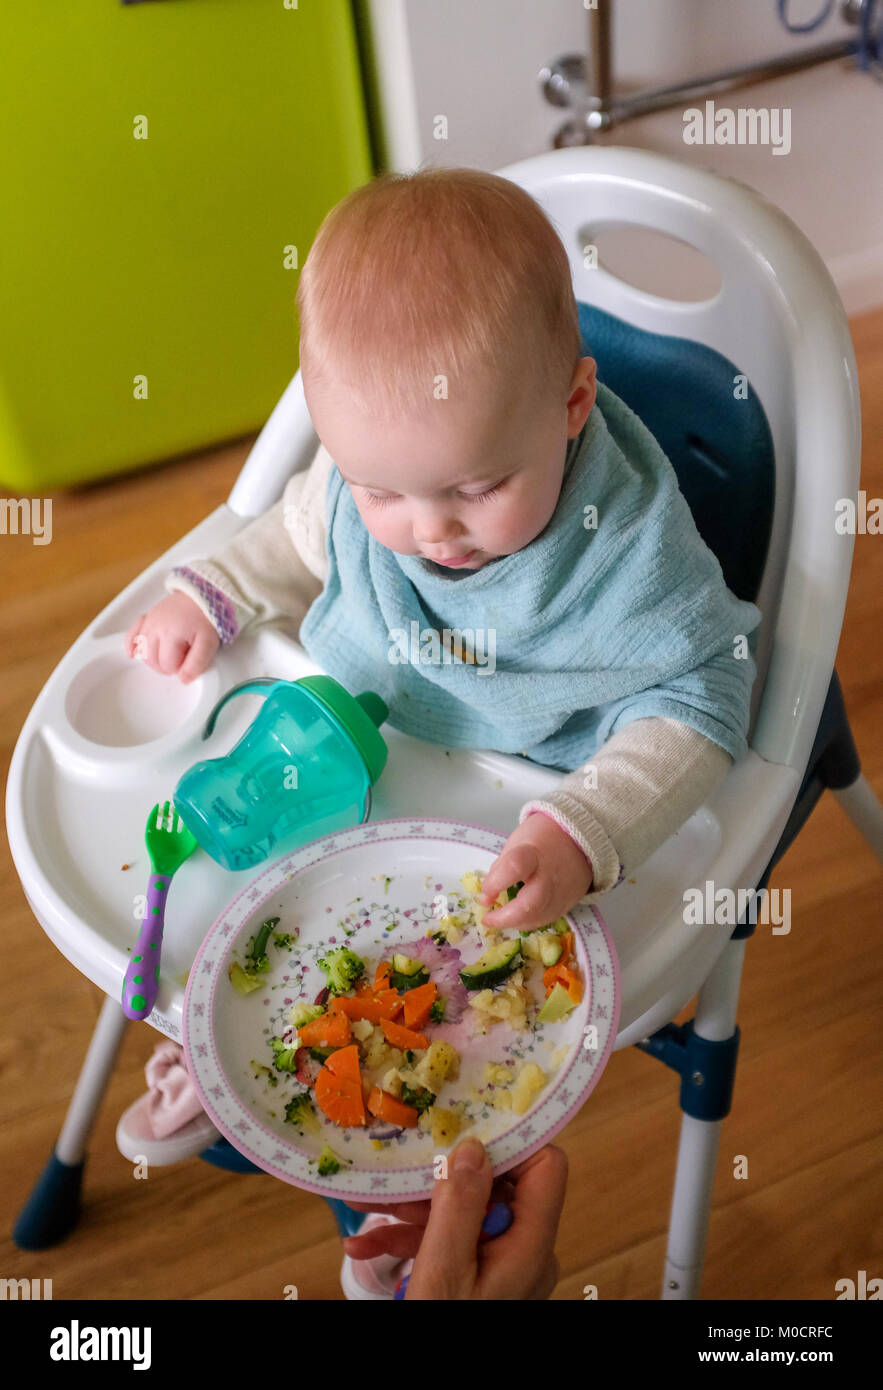 Young baby 1 year old girl toddler eating healthy lunch food of vegetables and fish fingers Stock Photo